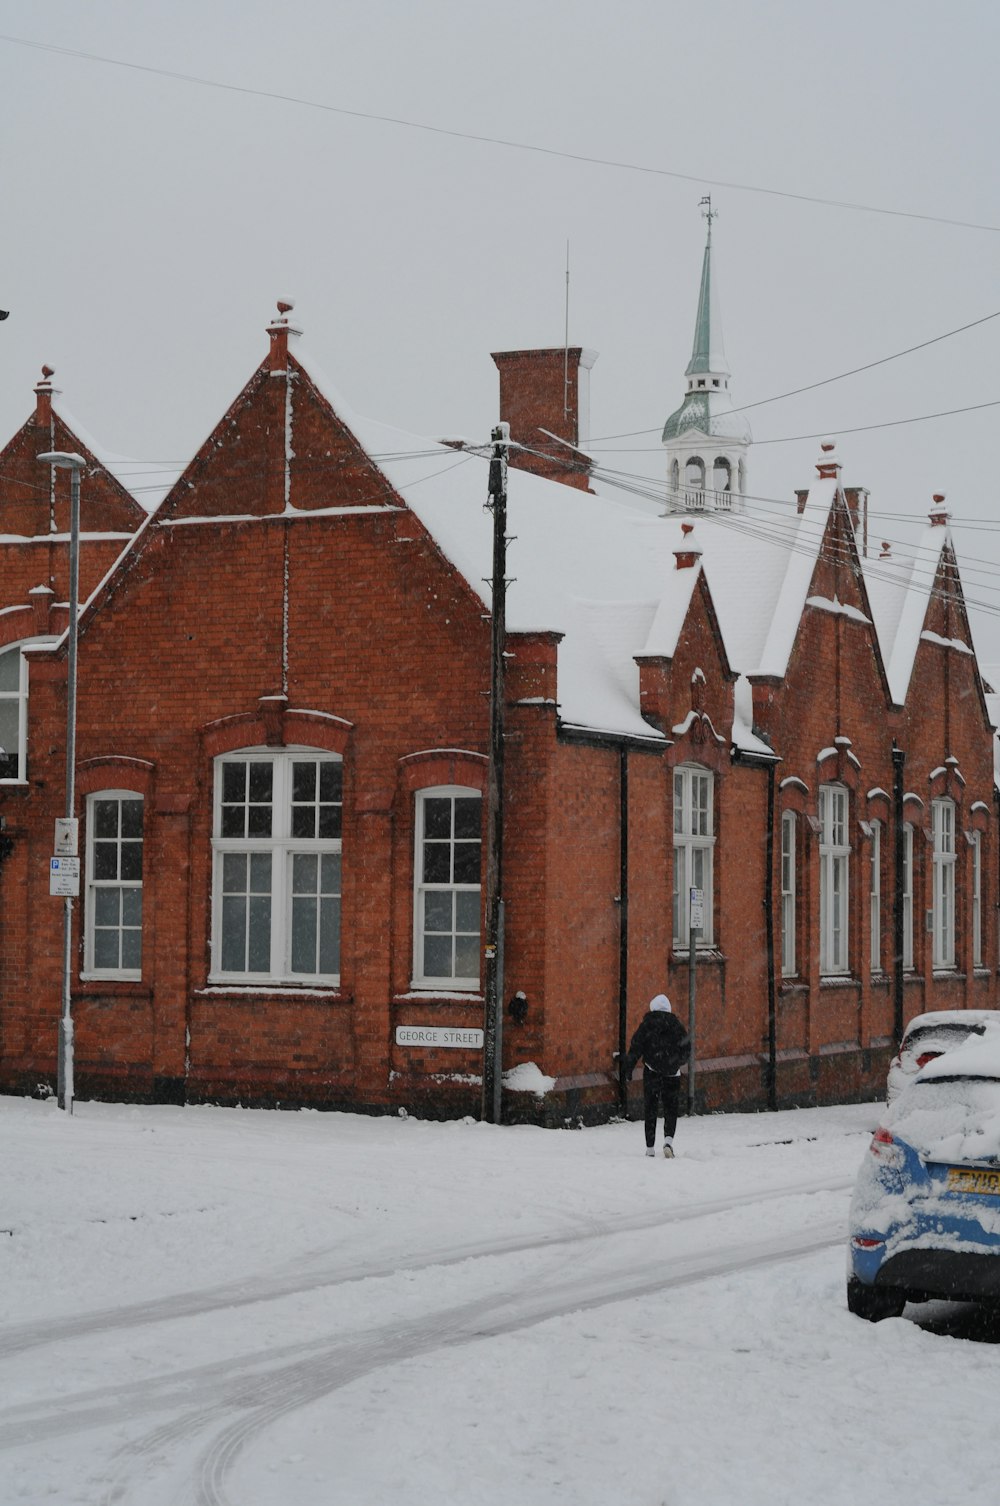 a car parked on a snowy street in front of a red brick building